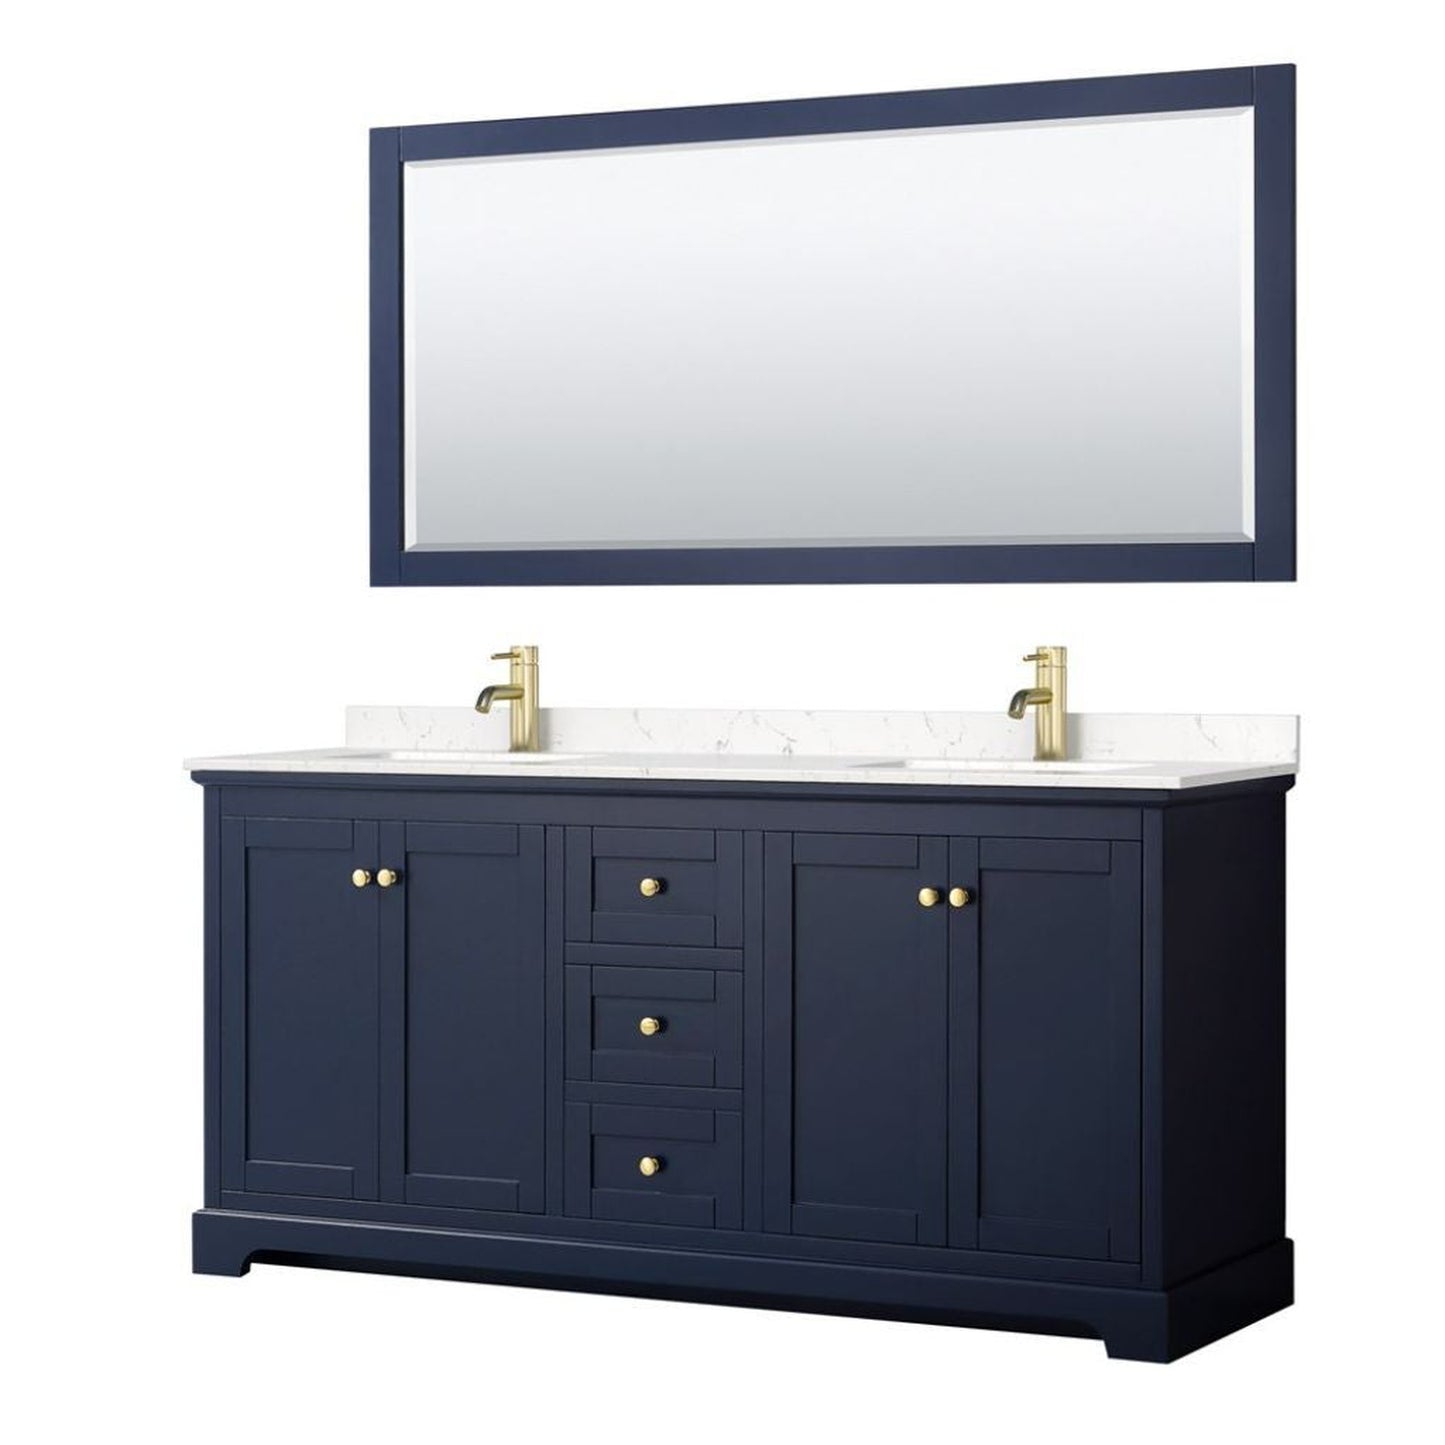 Wyndham Collection Avery 72" Dark Blue Double Bathroom Vanity Set With Light-Vein Cultured Marble Countertop With 1-Hole Faucet And Square Sink And 70" Mirror